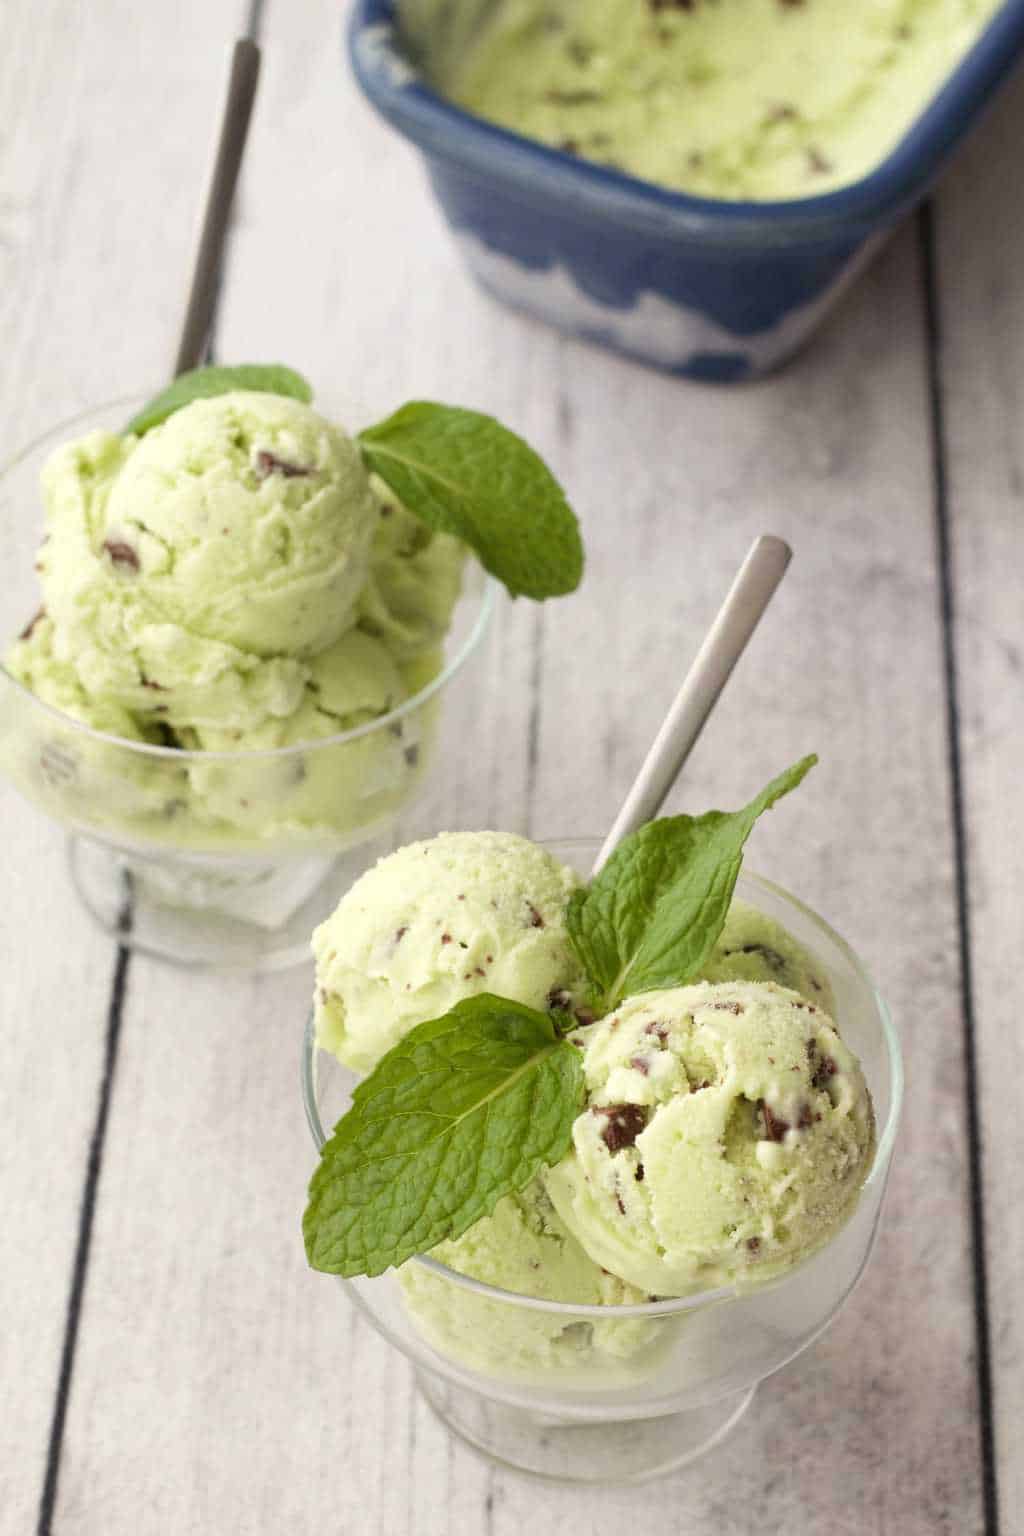 Scoops of vegan mint chocolate chip ice cream in glass bowls. 